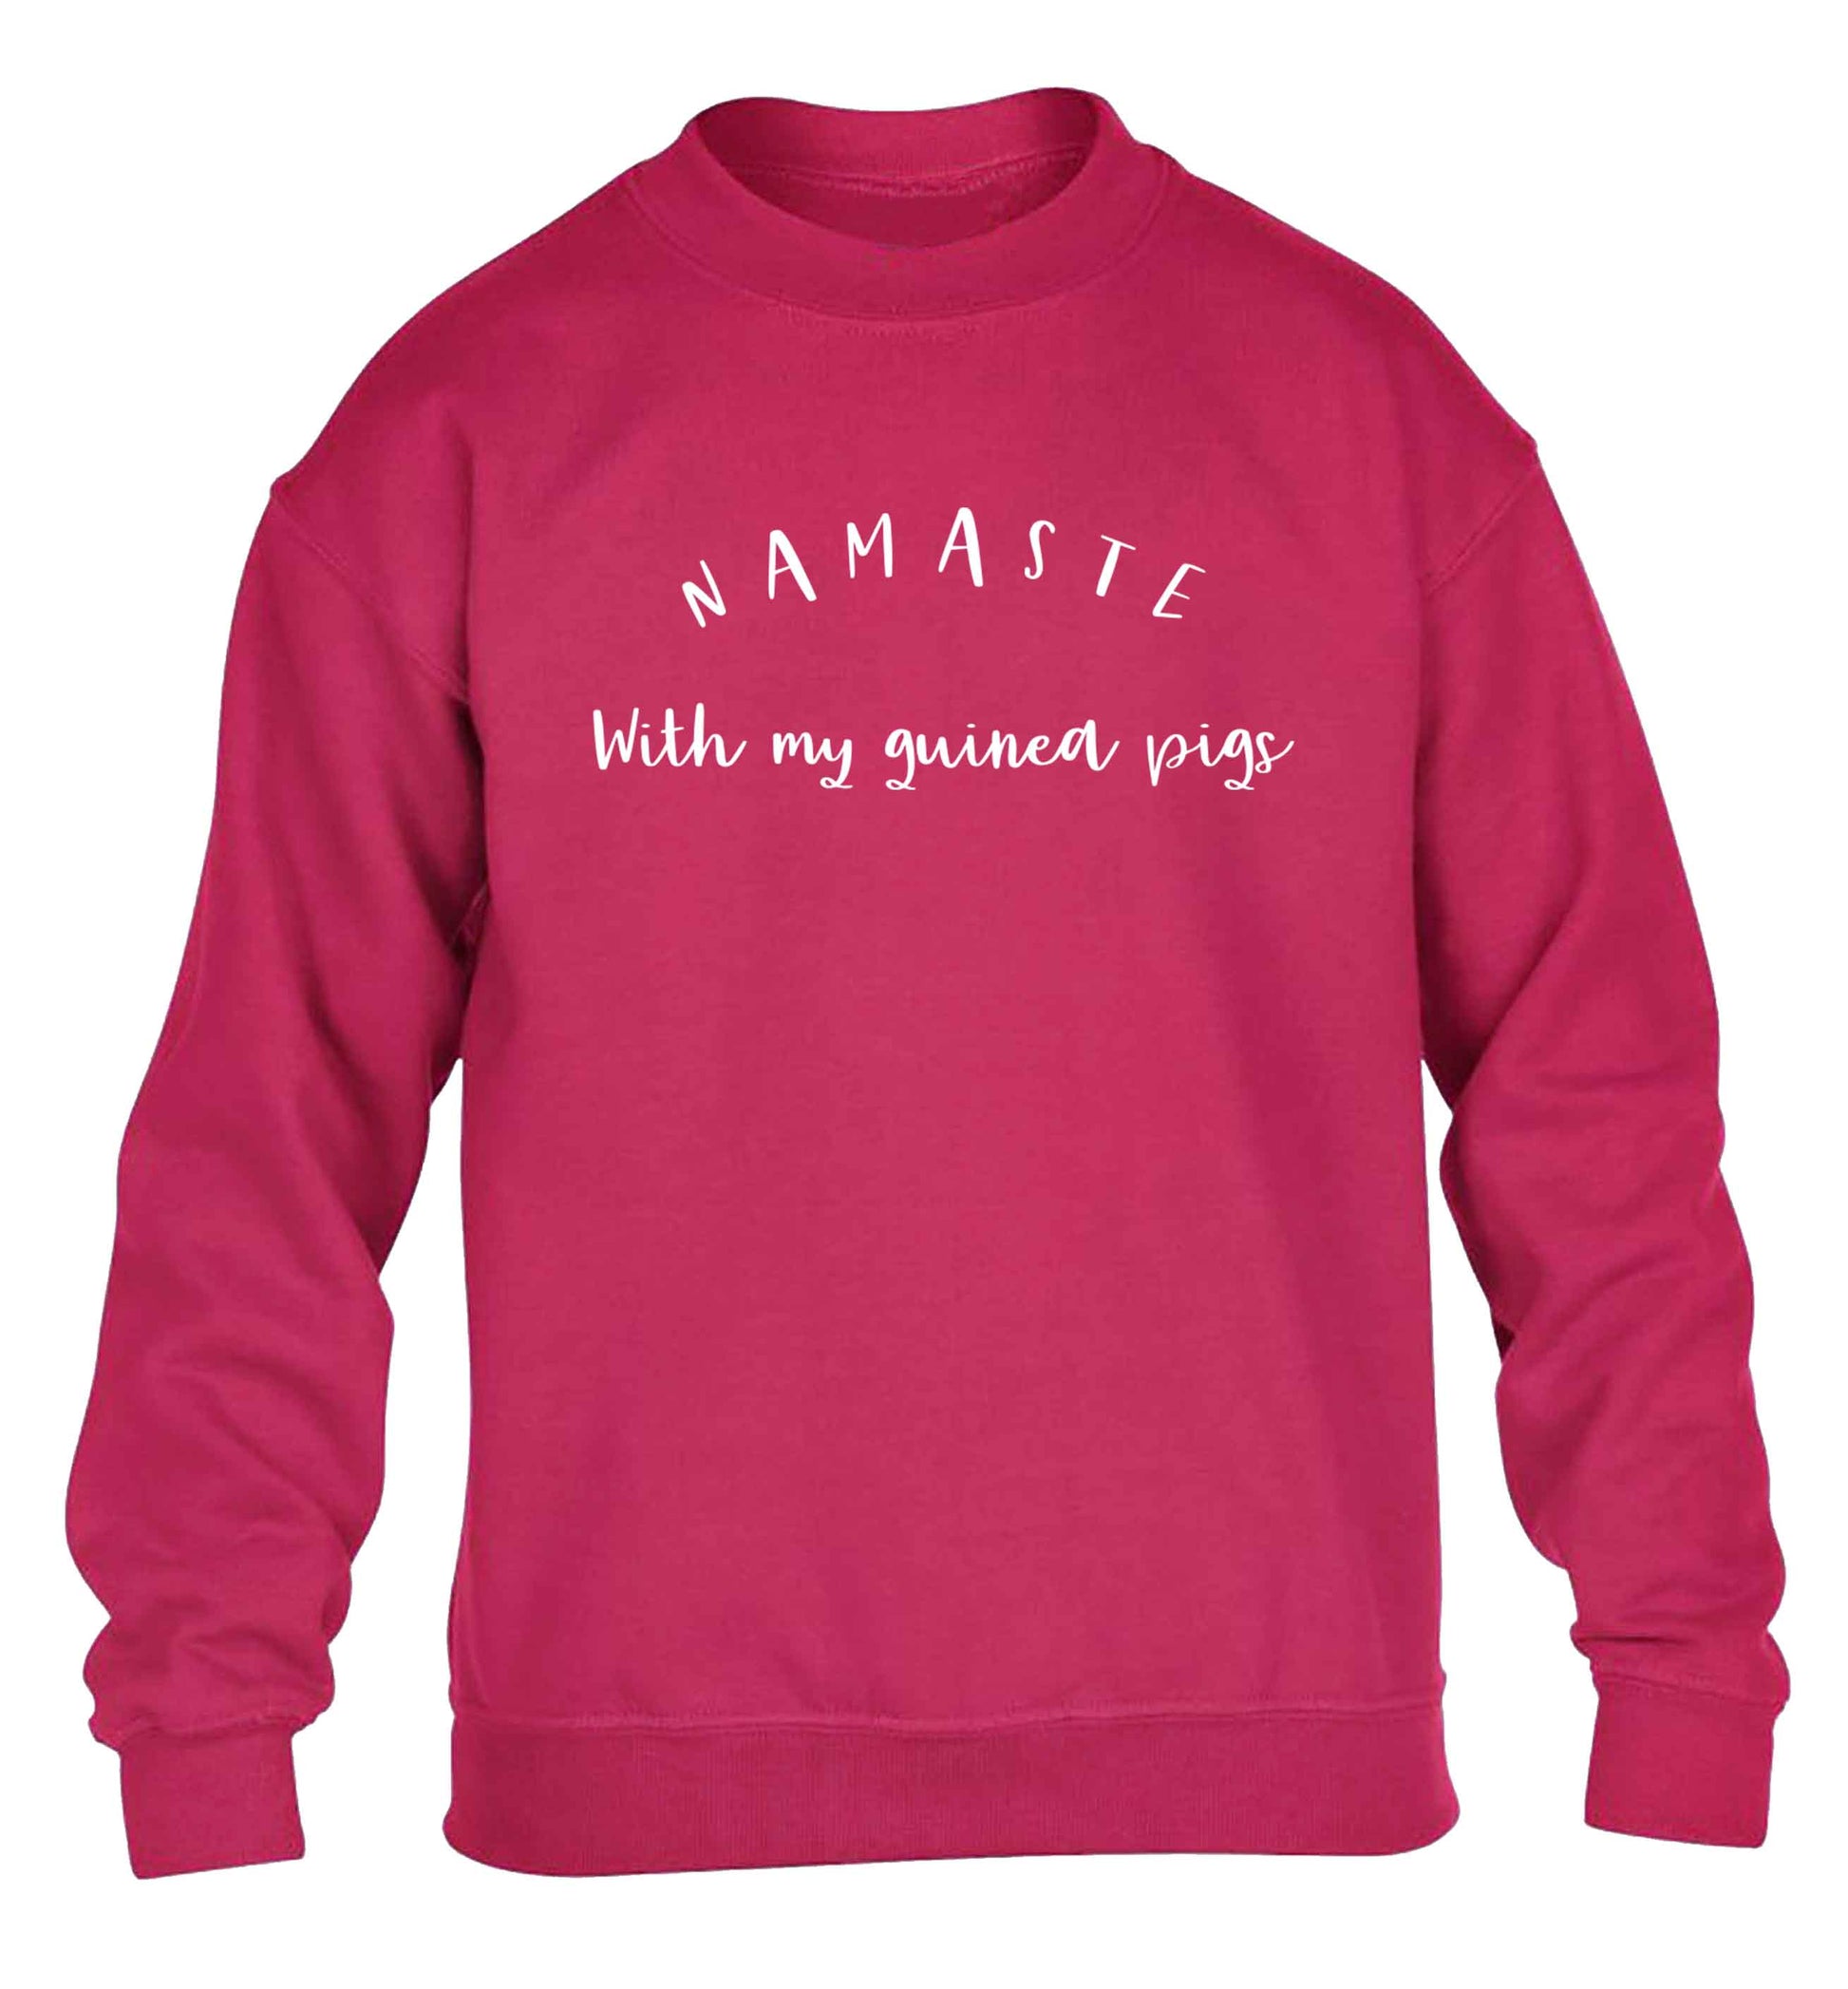 Namaste with my guinea pigs children's pink sweater 12-13 Years